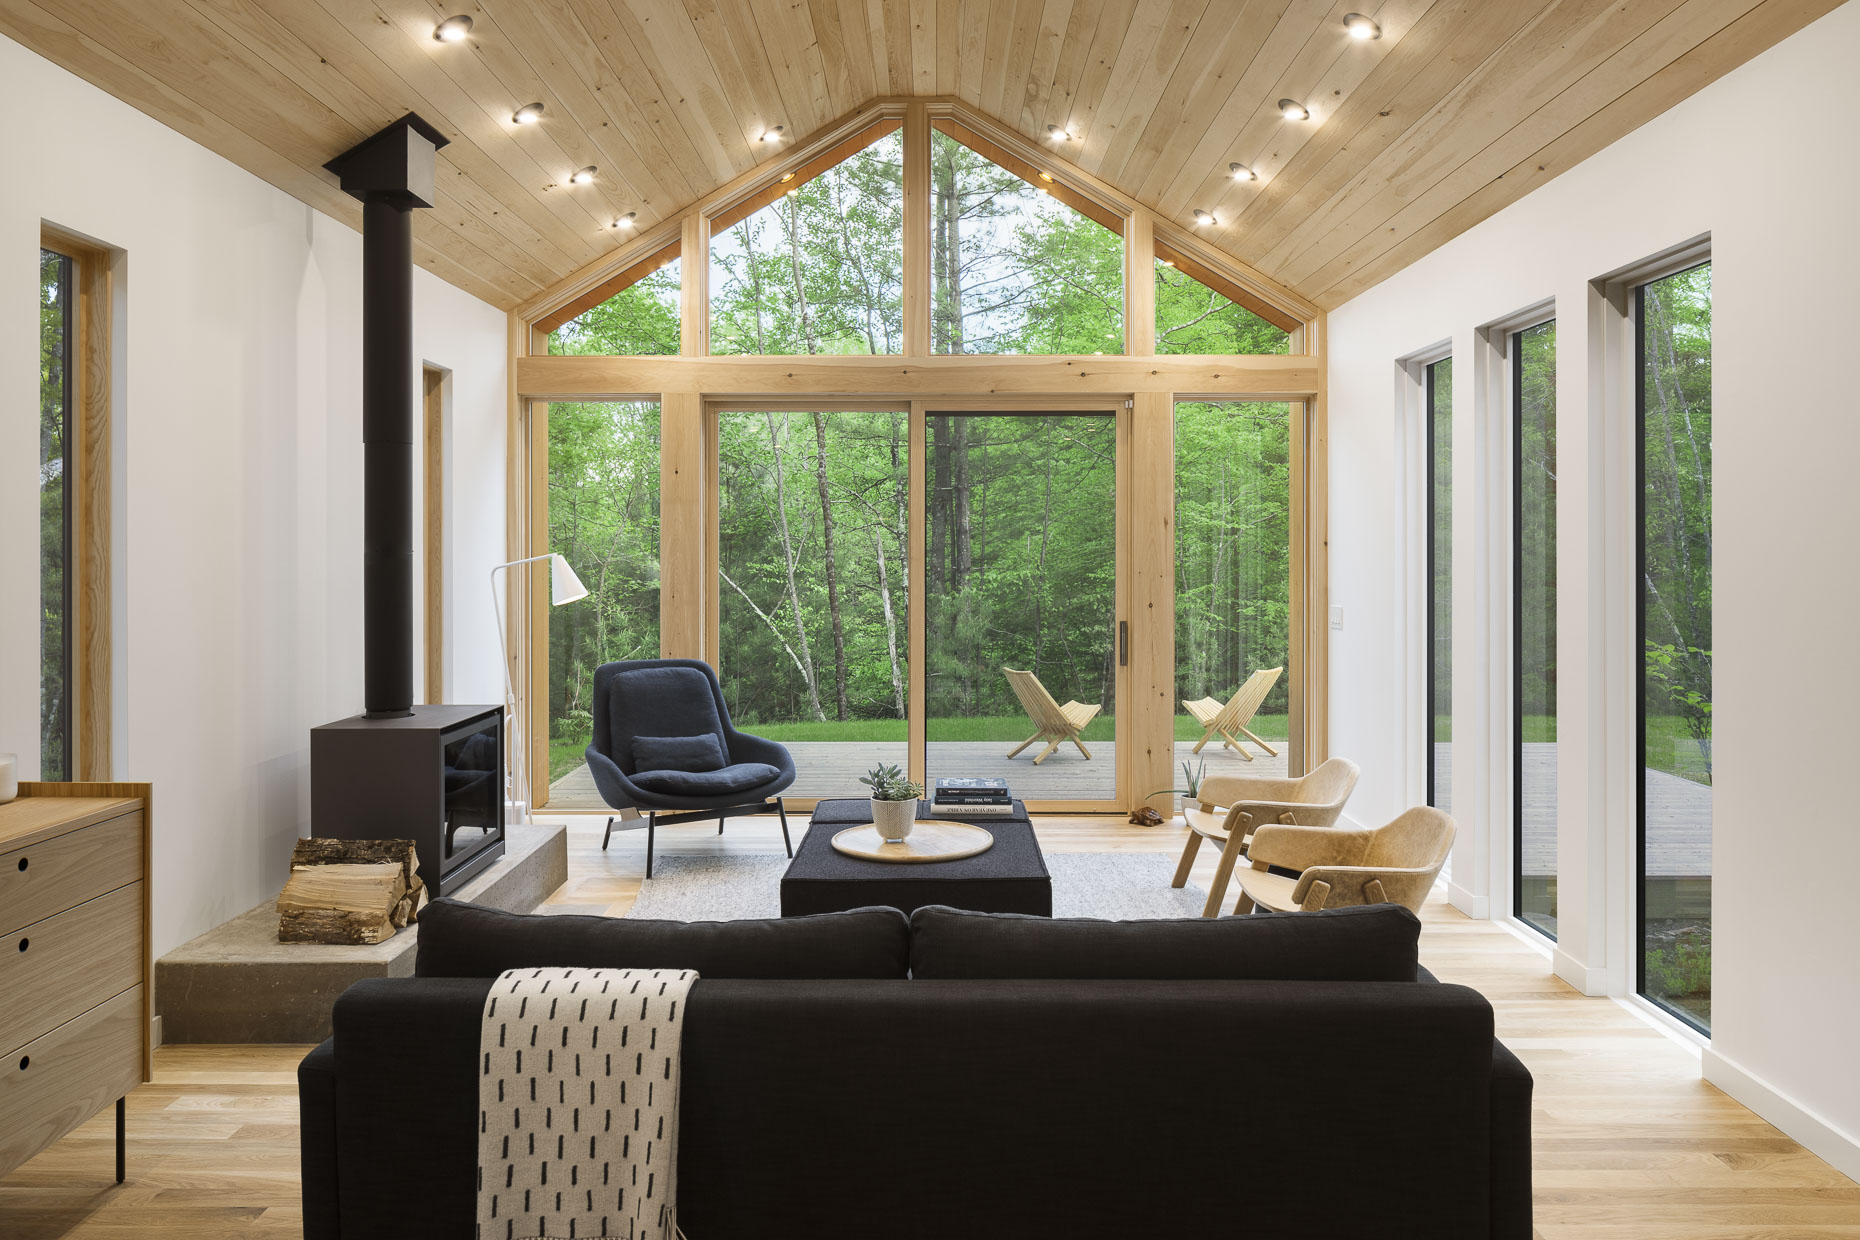 Chalet Perche by Studio MM photographed by Brad Feinknopf based in Columbus, Ohio